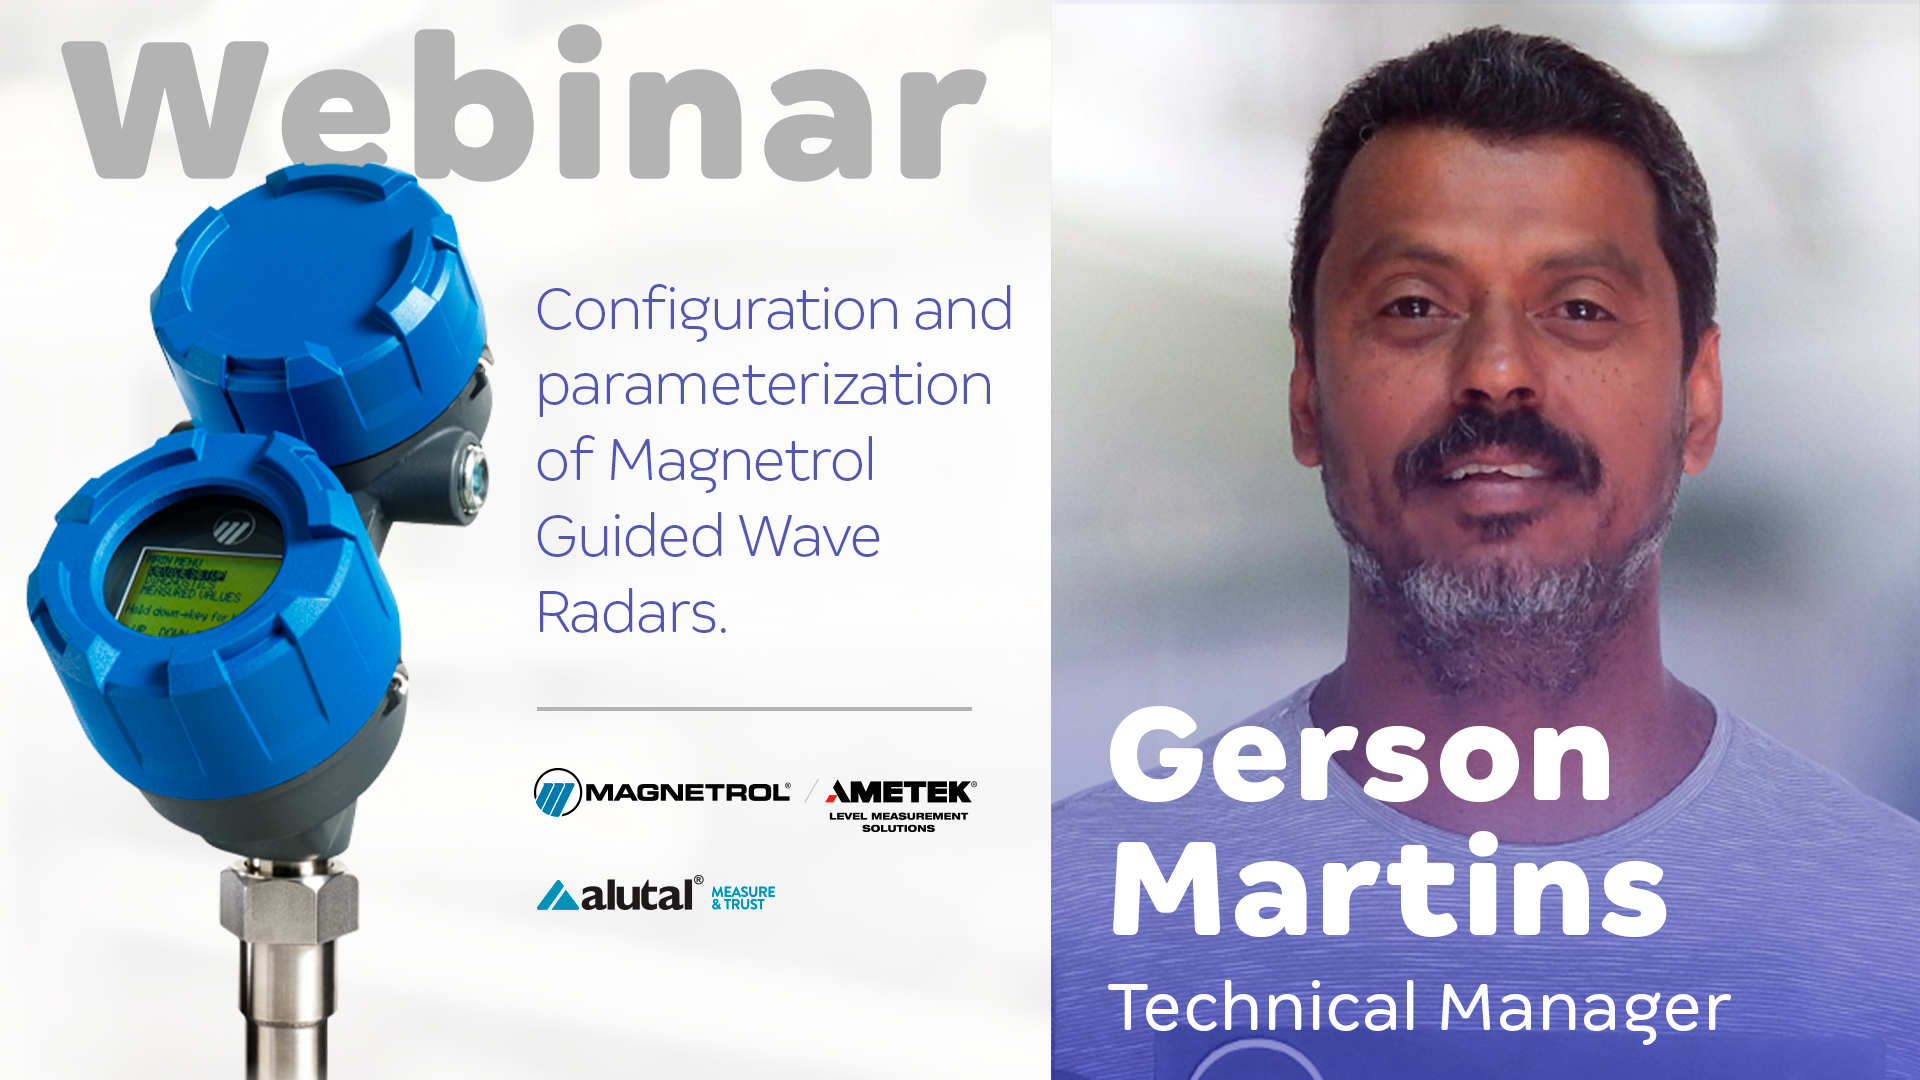 Technical Webinar - Configuration and Parameterization of Magnetrol Guided Wave Radars